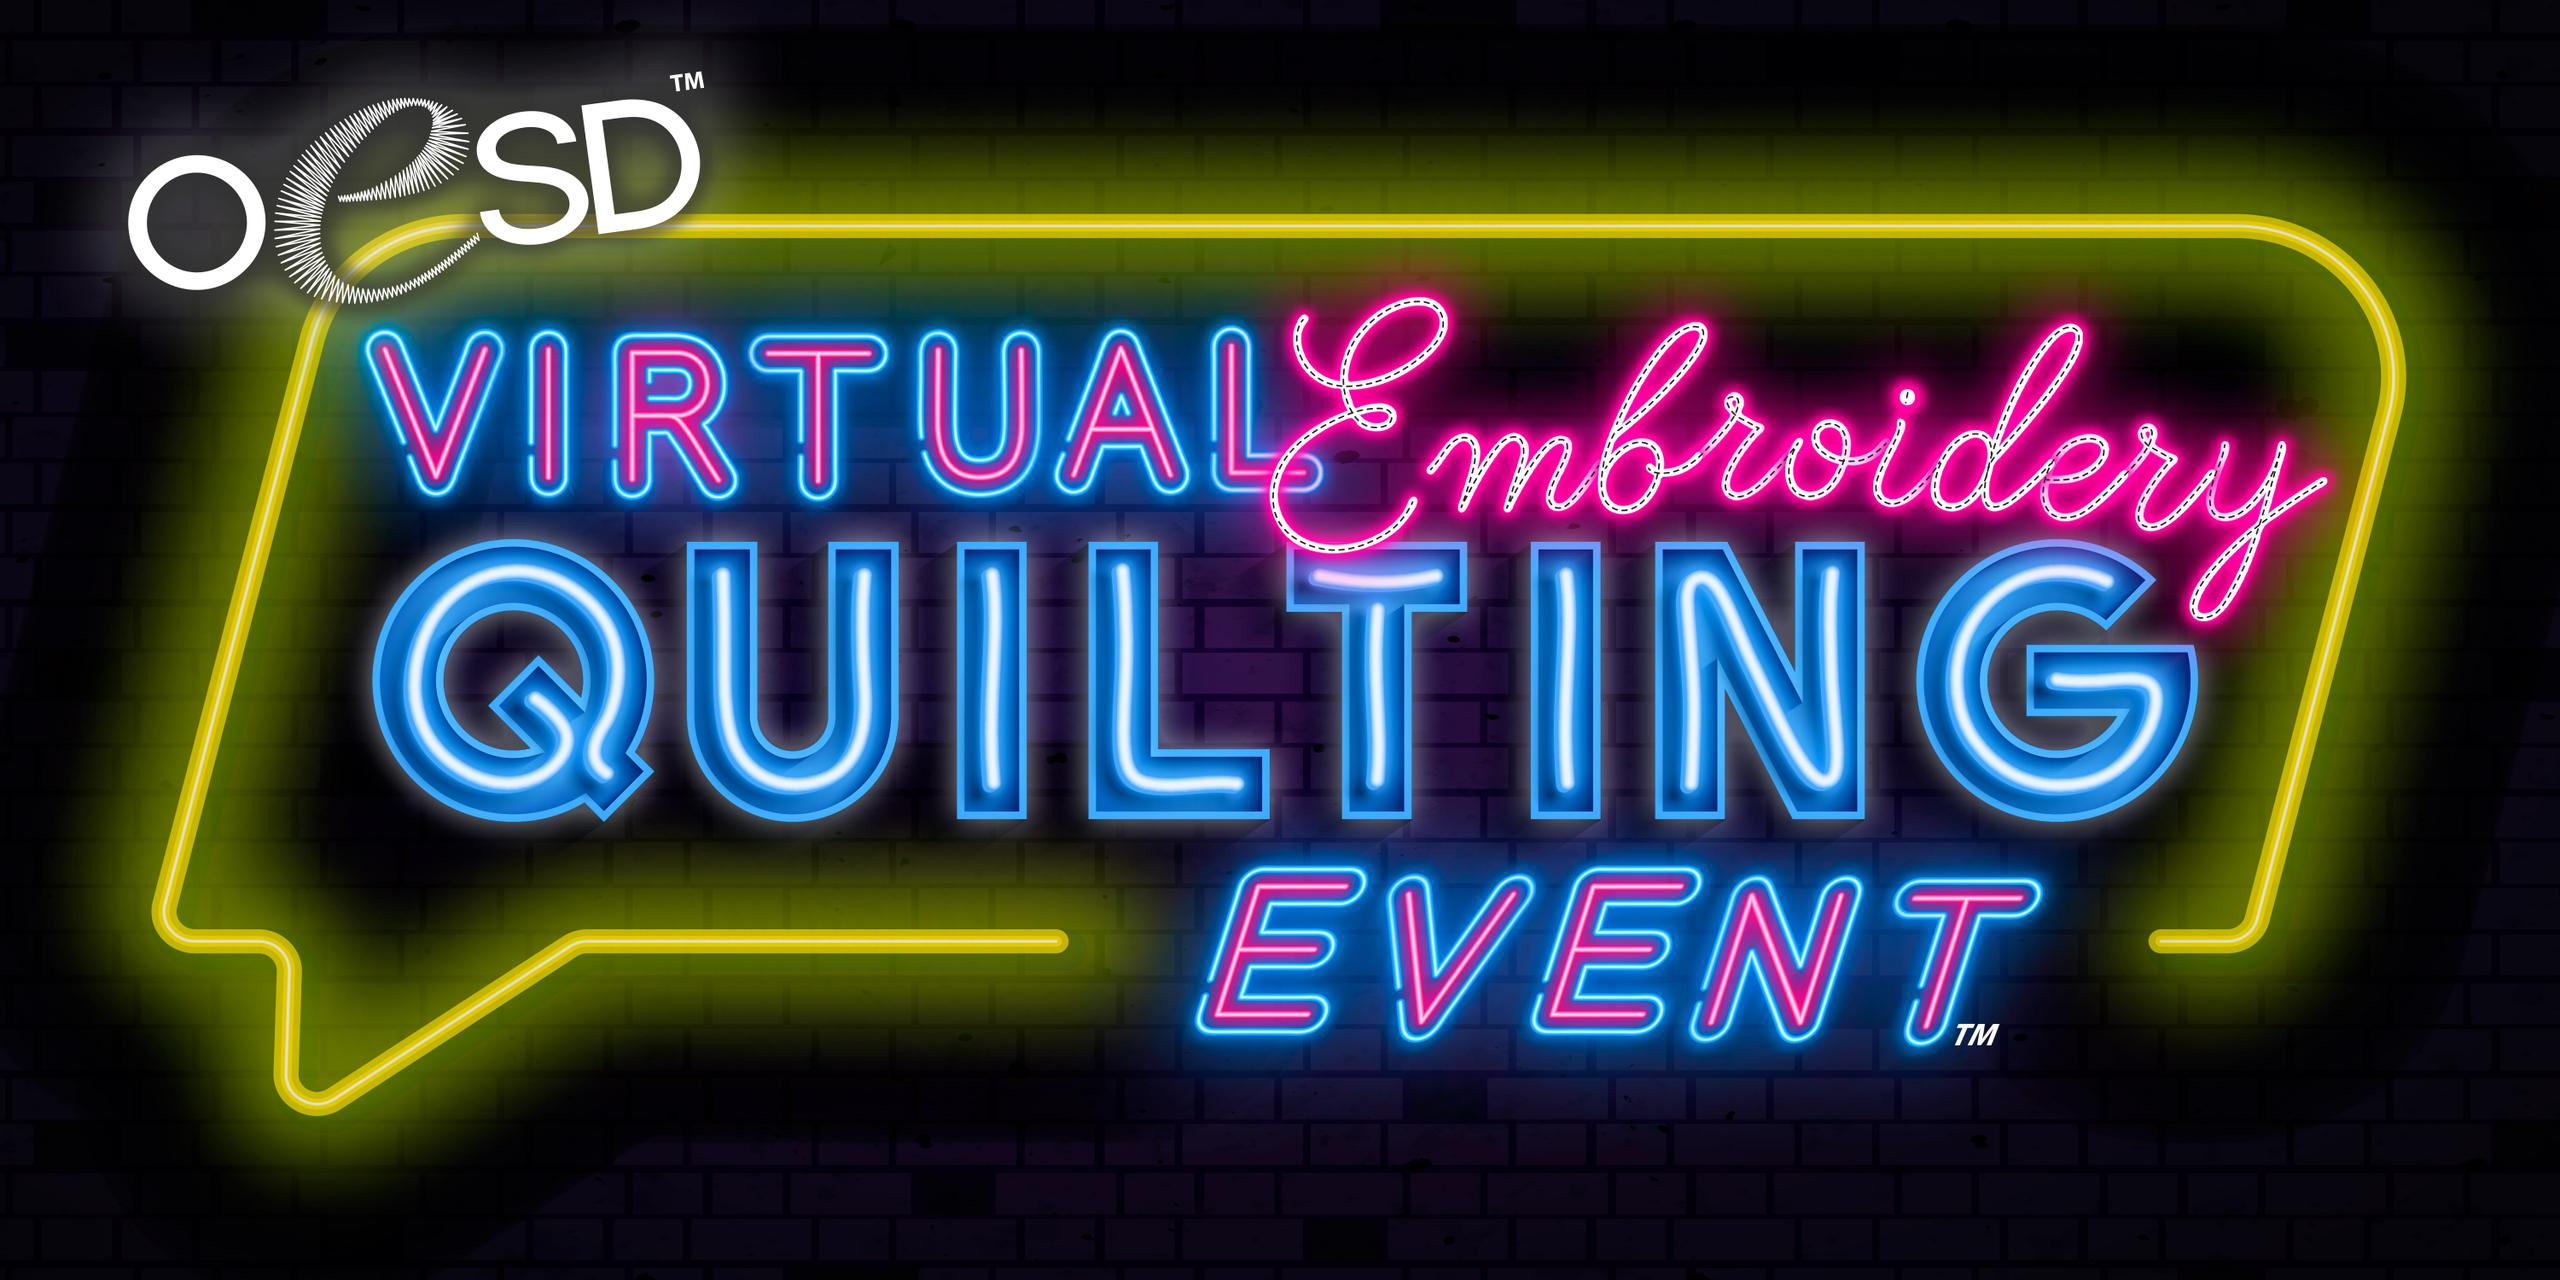 oesd virtual event banner